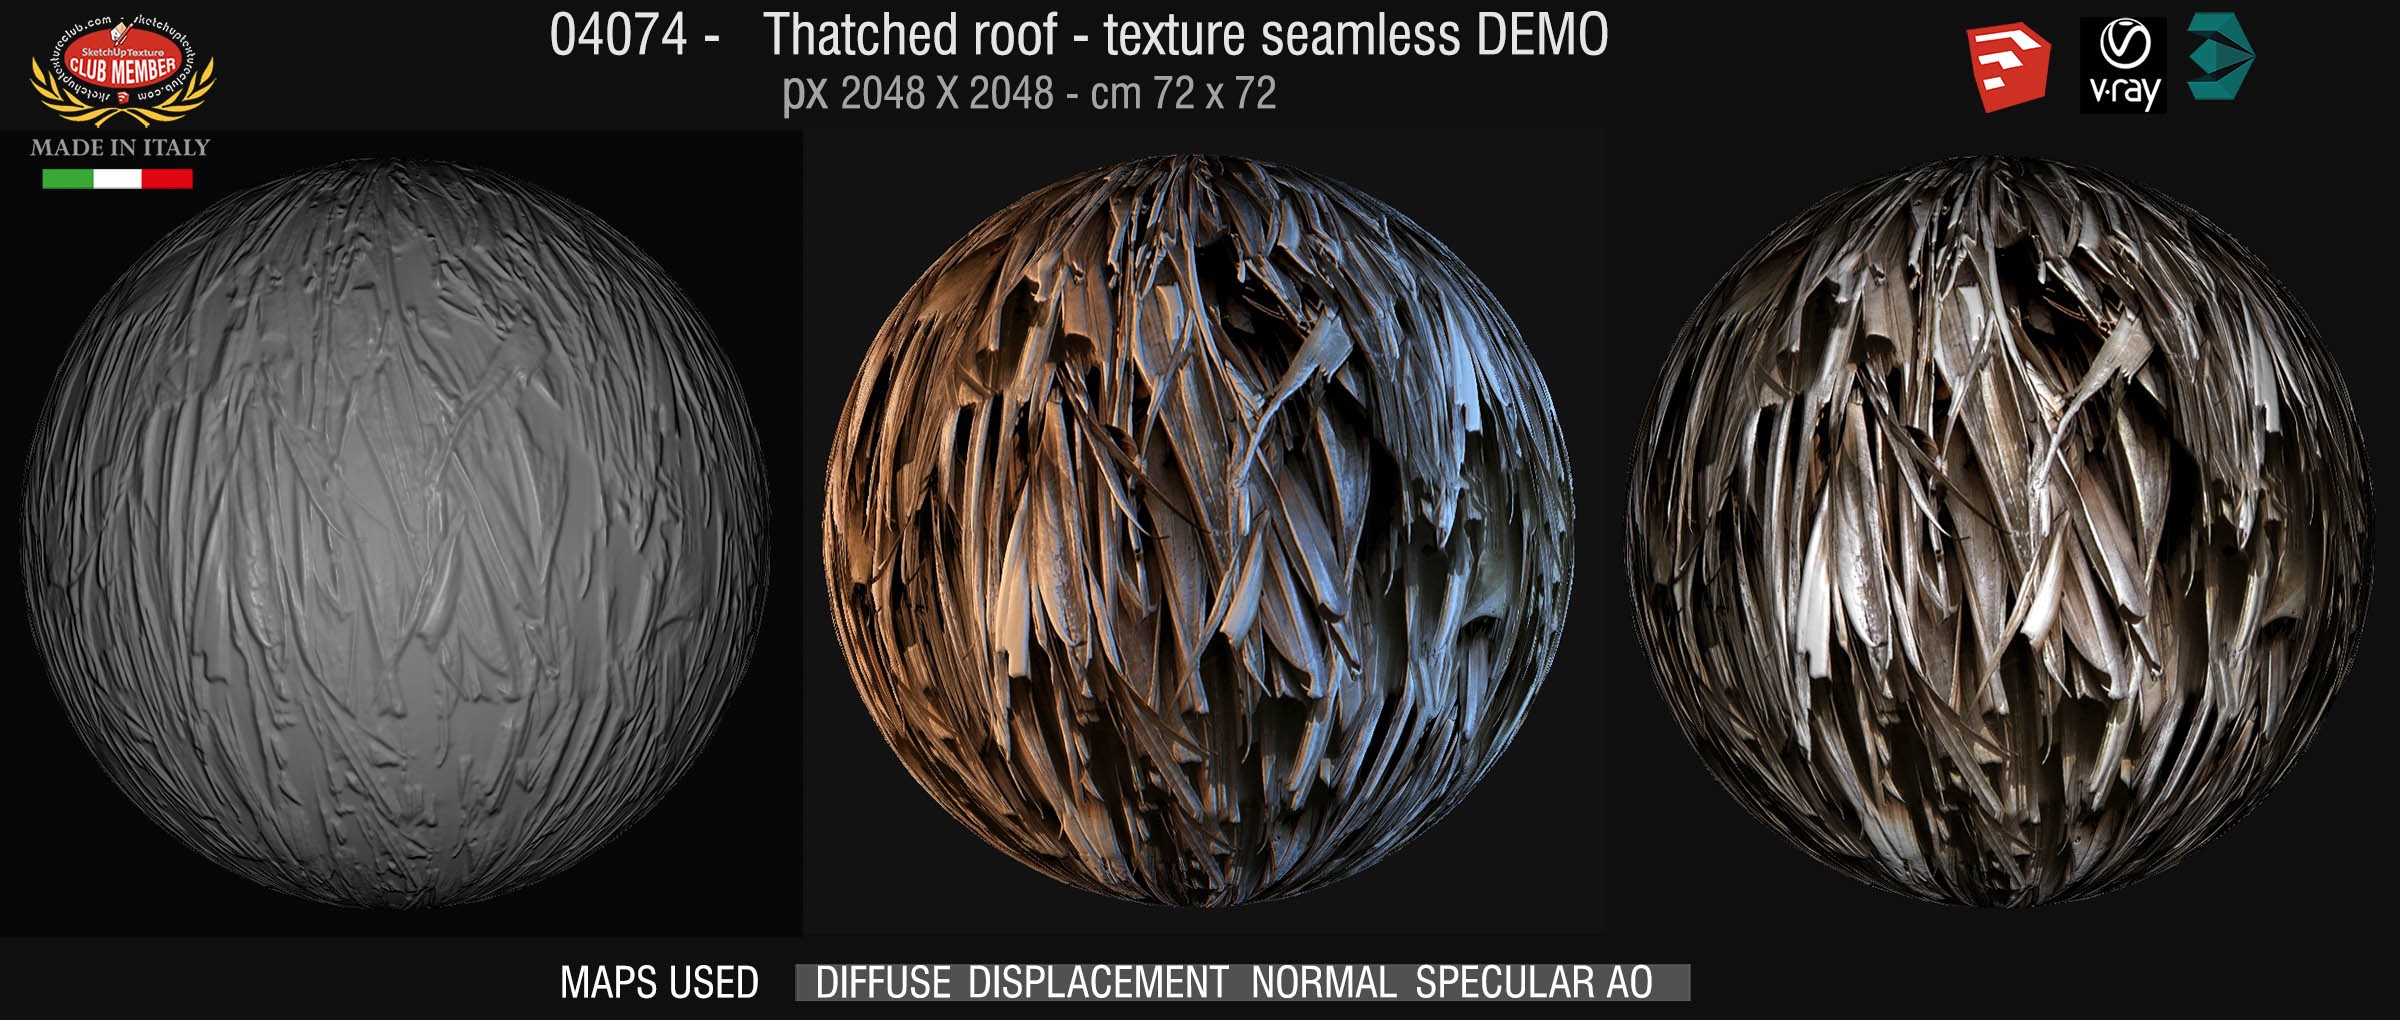 04074 Thatched roof texture seamless + maps DEMO